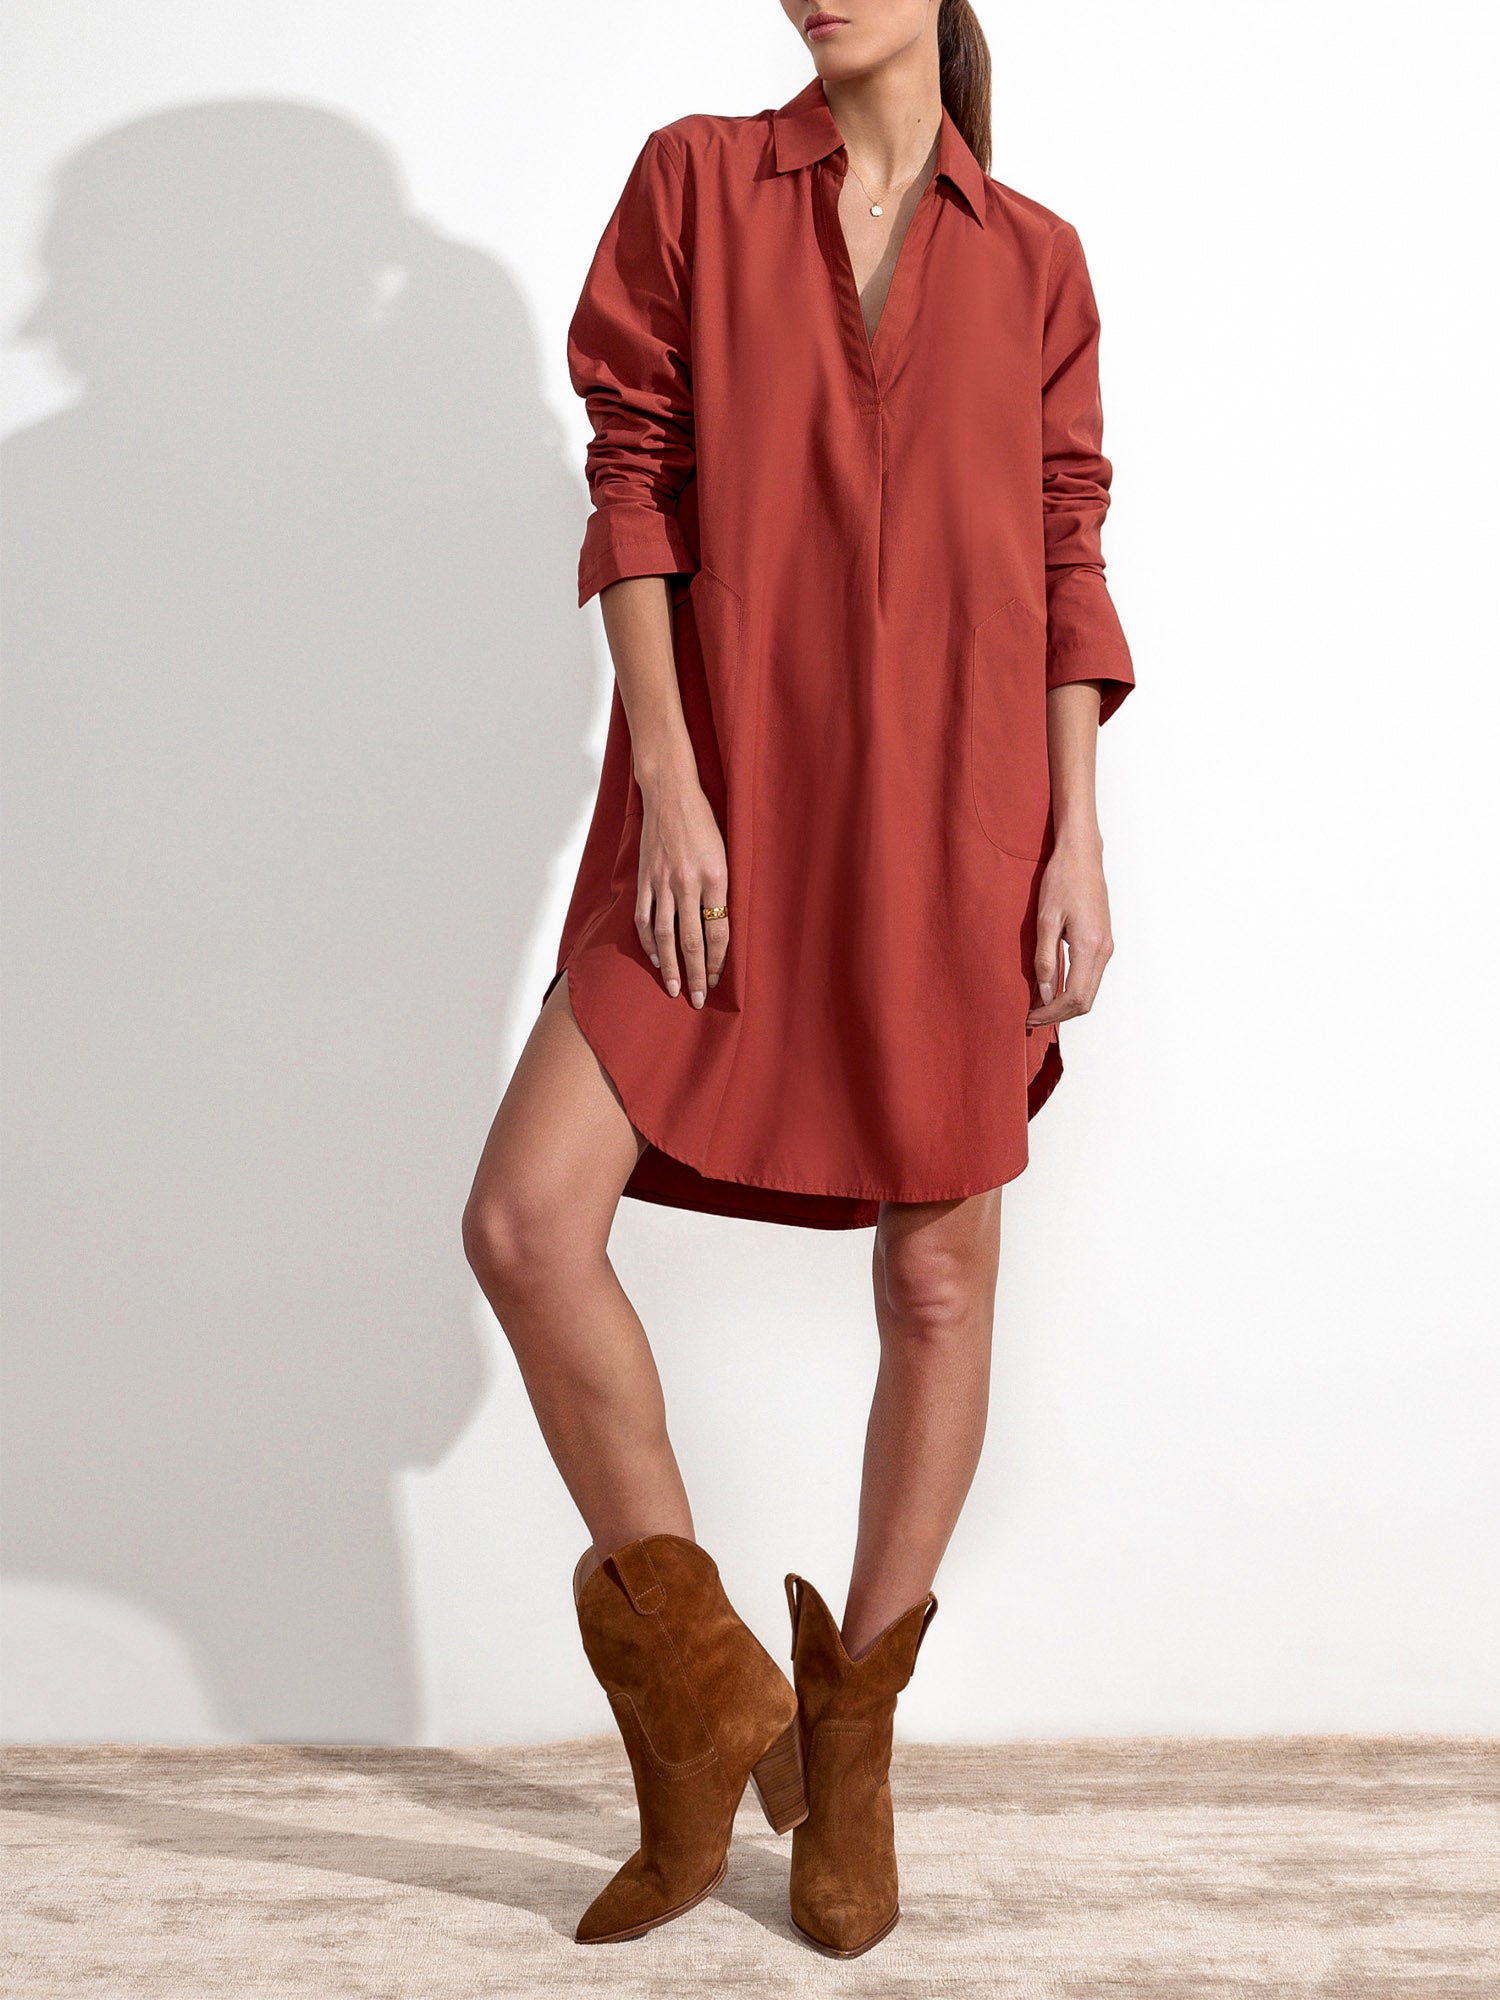 Ives red mini shirtdress front view